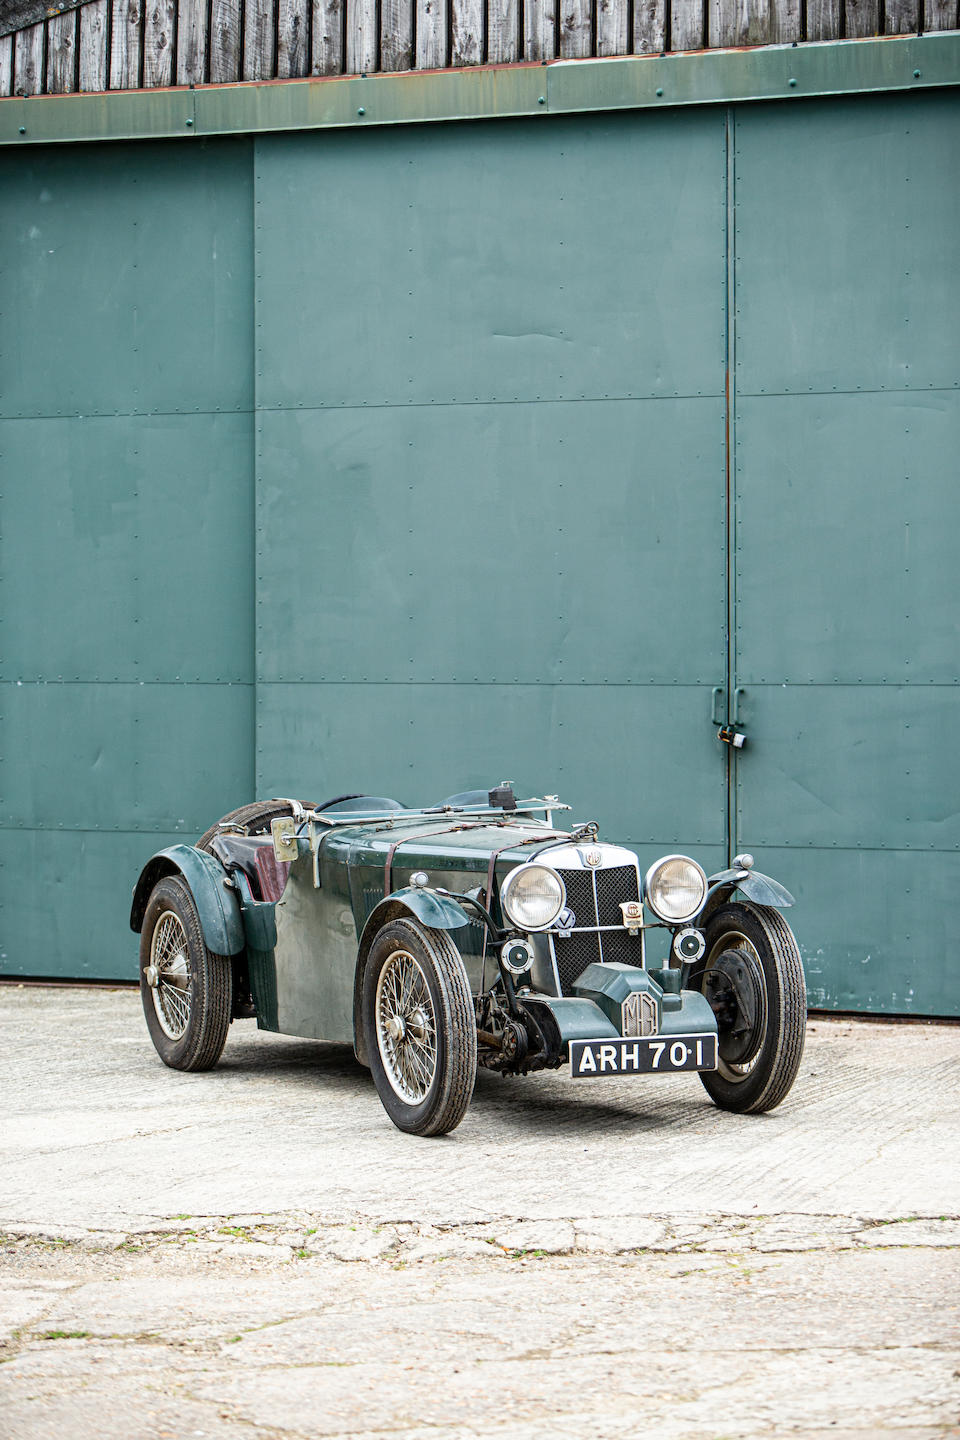 1935 MG L1 'K3 Special' Two-Seater  Chassis no. L0432